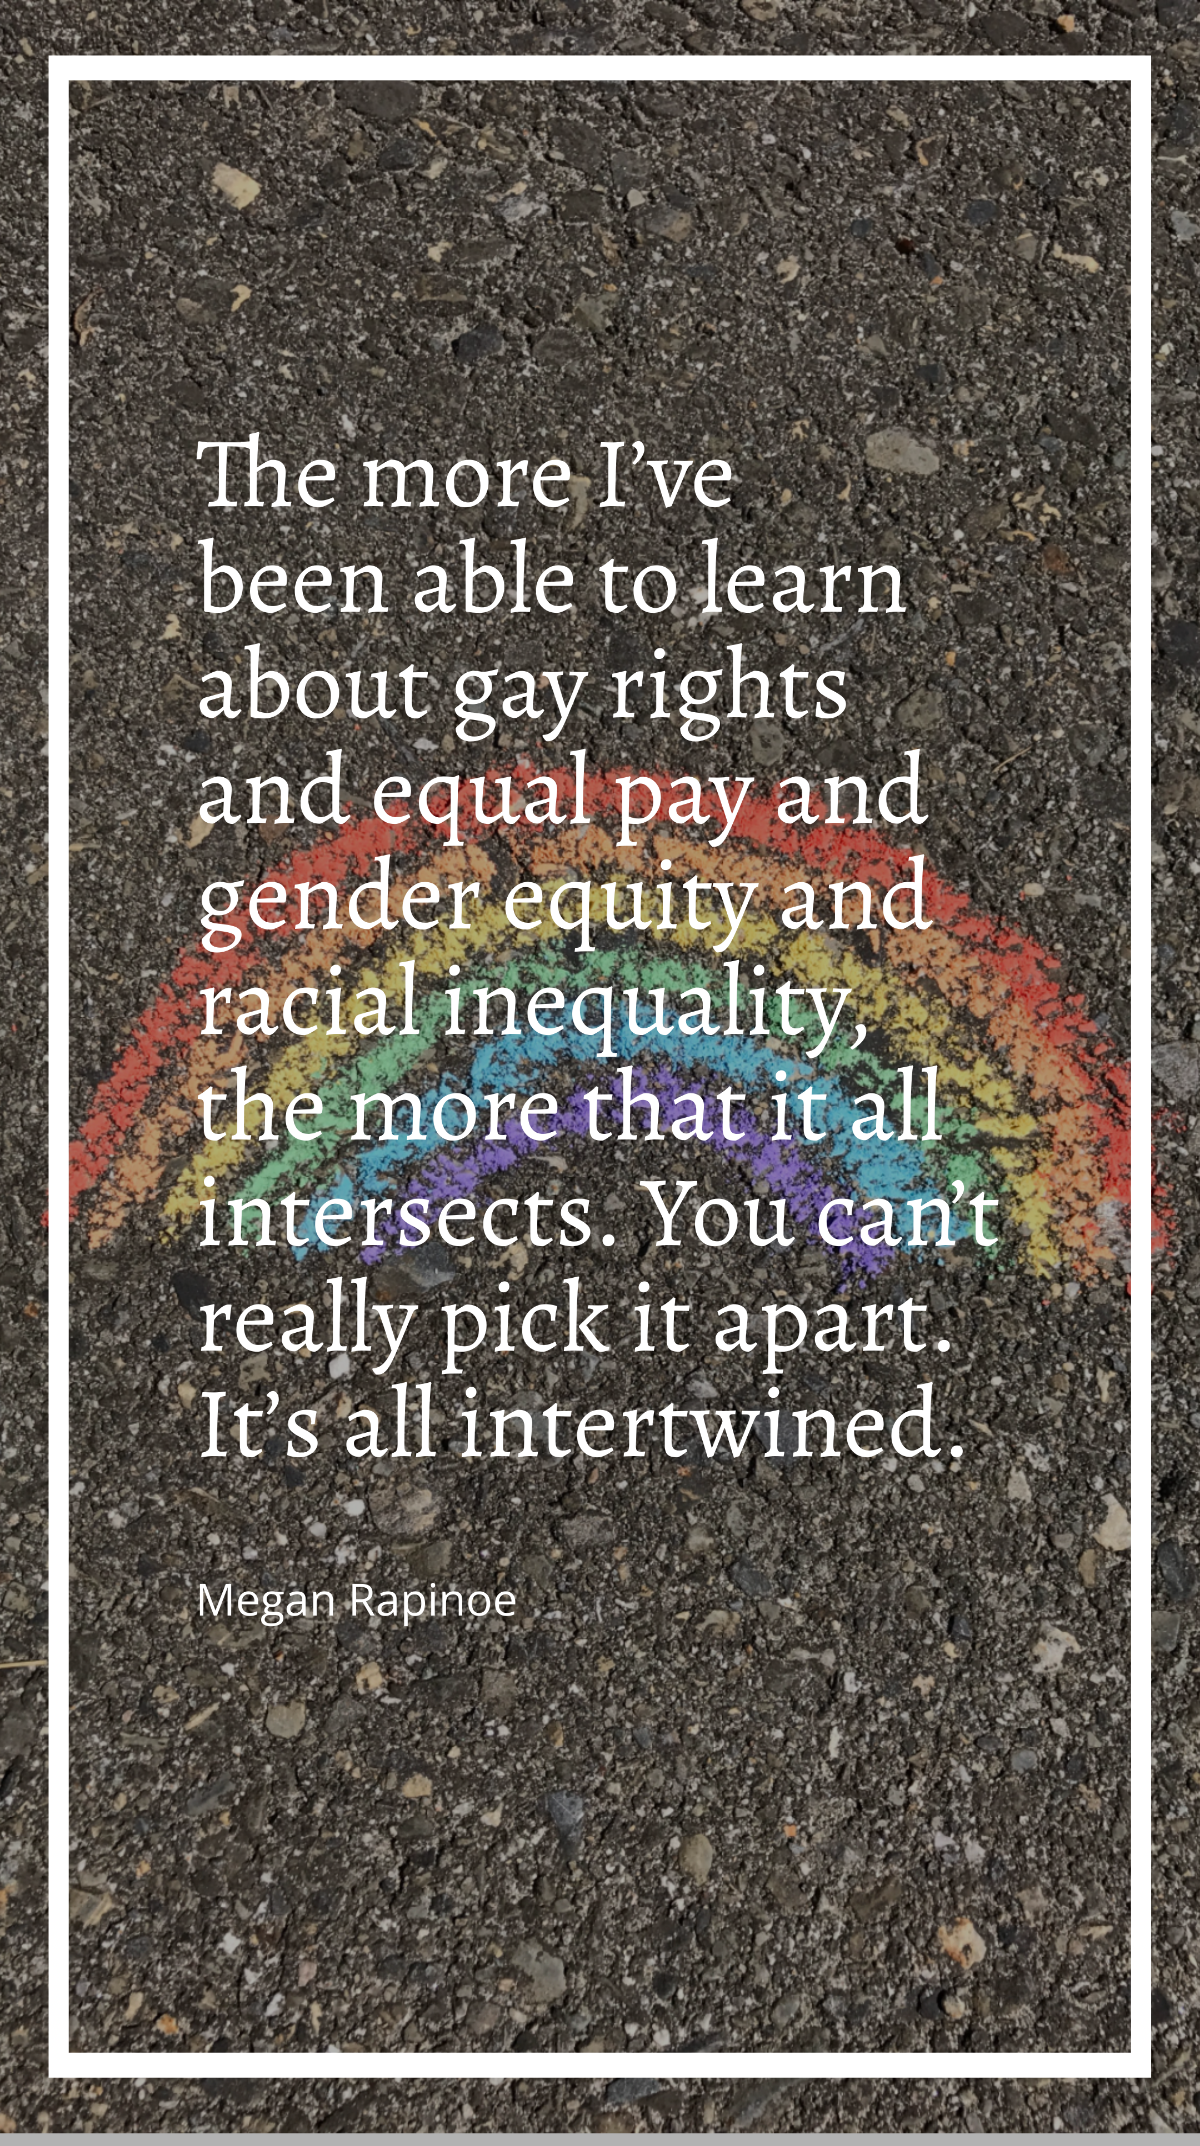 Megan Rapinoe - The more I’ve been able to learn about gay rights and equal pay and gender equity and racial inequality, the more that it all intersects. You can’t really pick it apart. It’s all inter